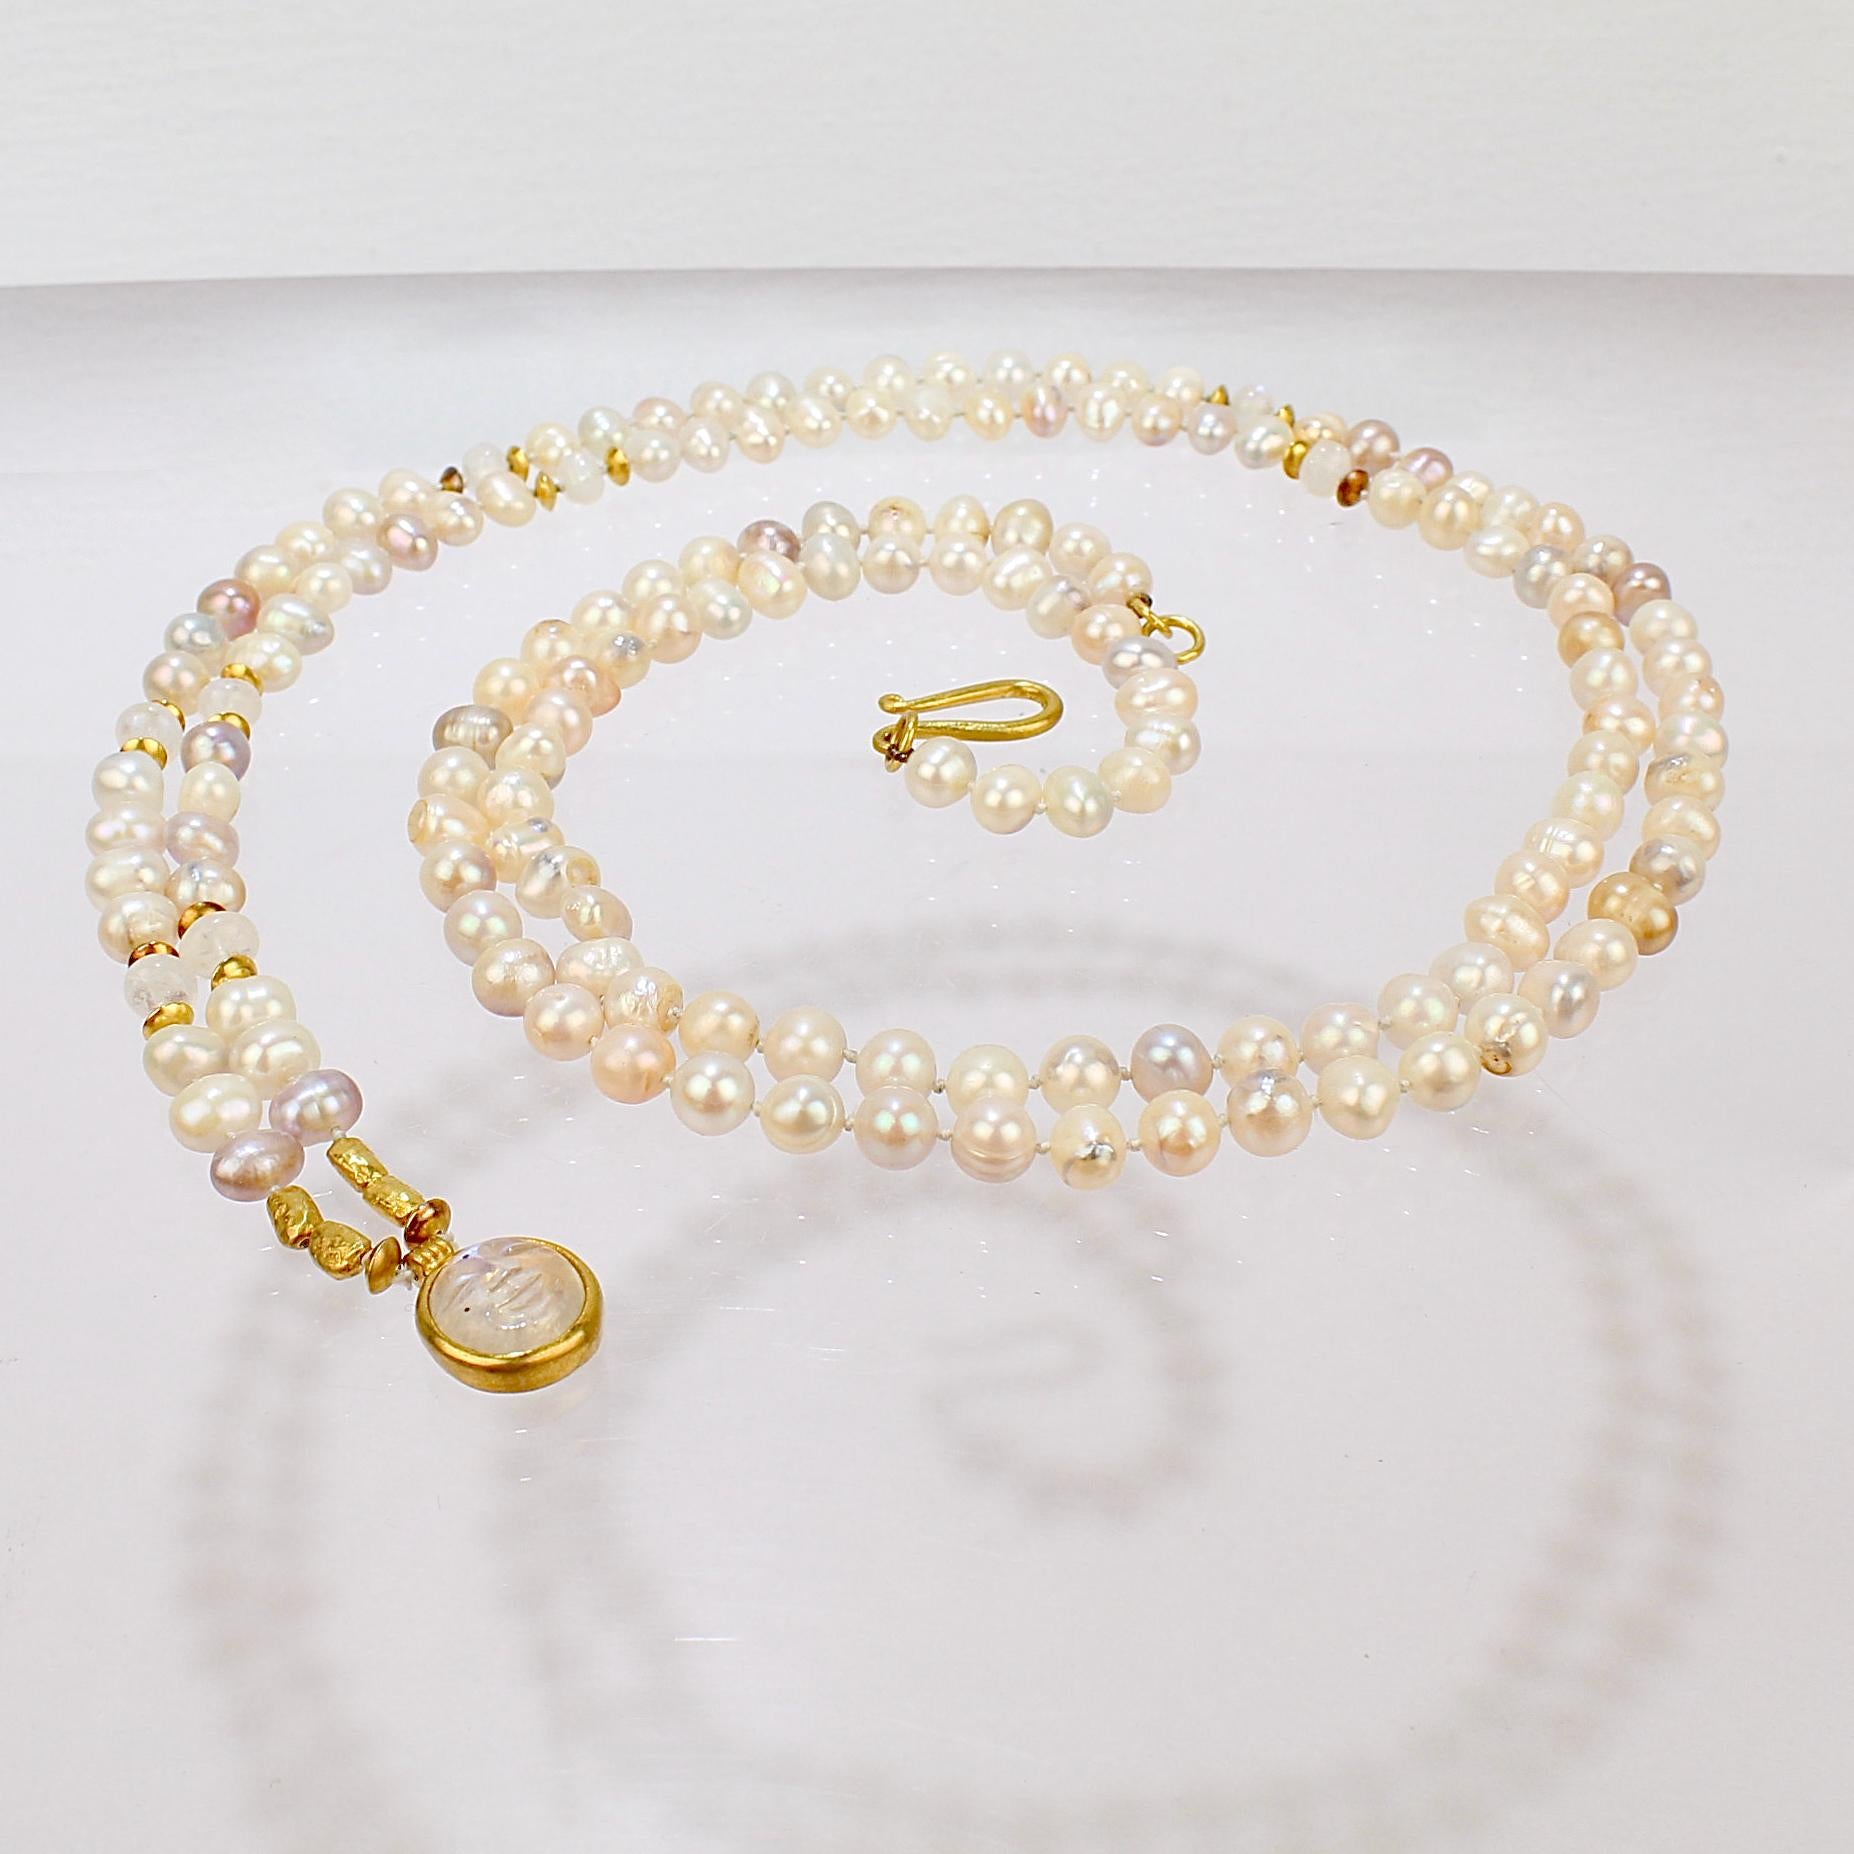 A very fine high karat gold, pearl and moonstone necklace by Darlene de Sedle.

The necklace consists of colored and white hand knotted pearls, 22 karat gold findings and beads, and several moonstone beads as well as a carved moonstone cabochon